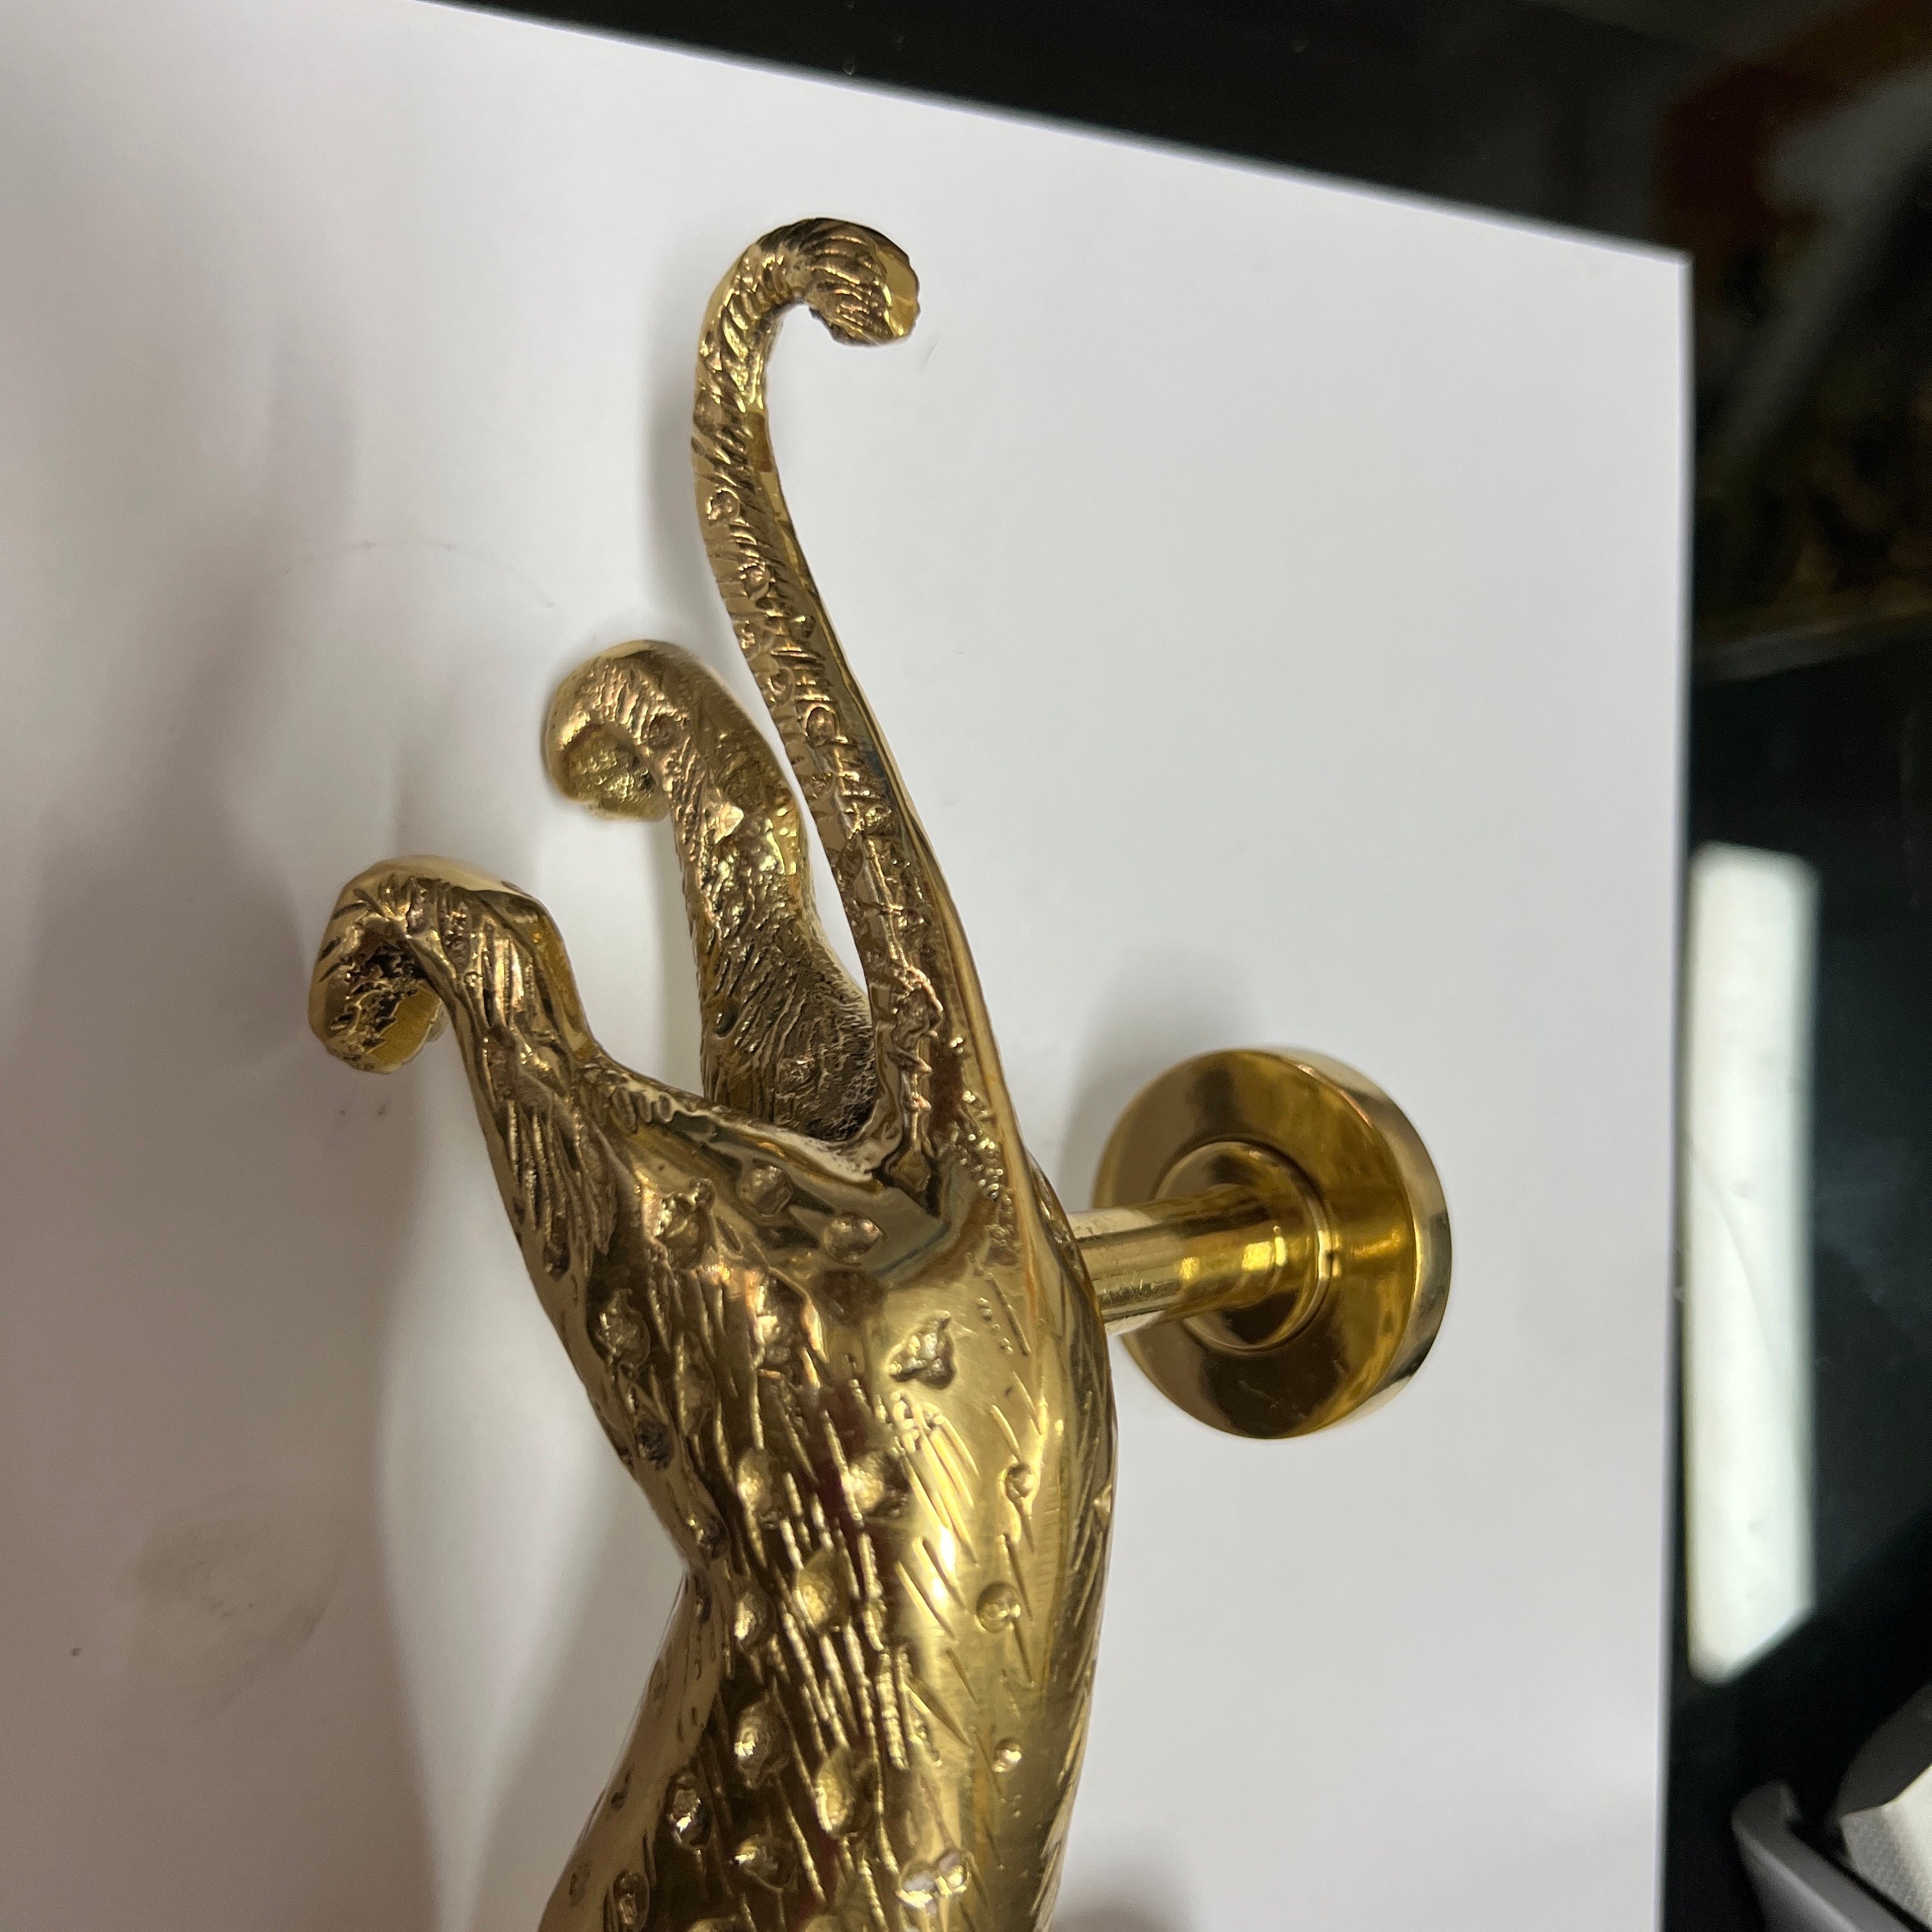 Stunning LEOPARD CHEETAH Shape Curvy seaside 100% Brass Door Pull Handle  11 Grab Old Style 27 cm left or right available - Watson Brass - Javanese  Handicrafts & Accessories